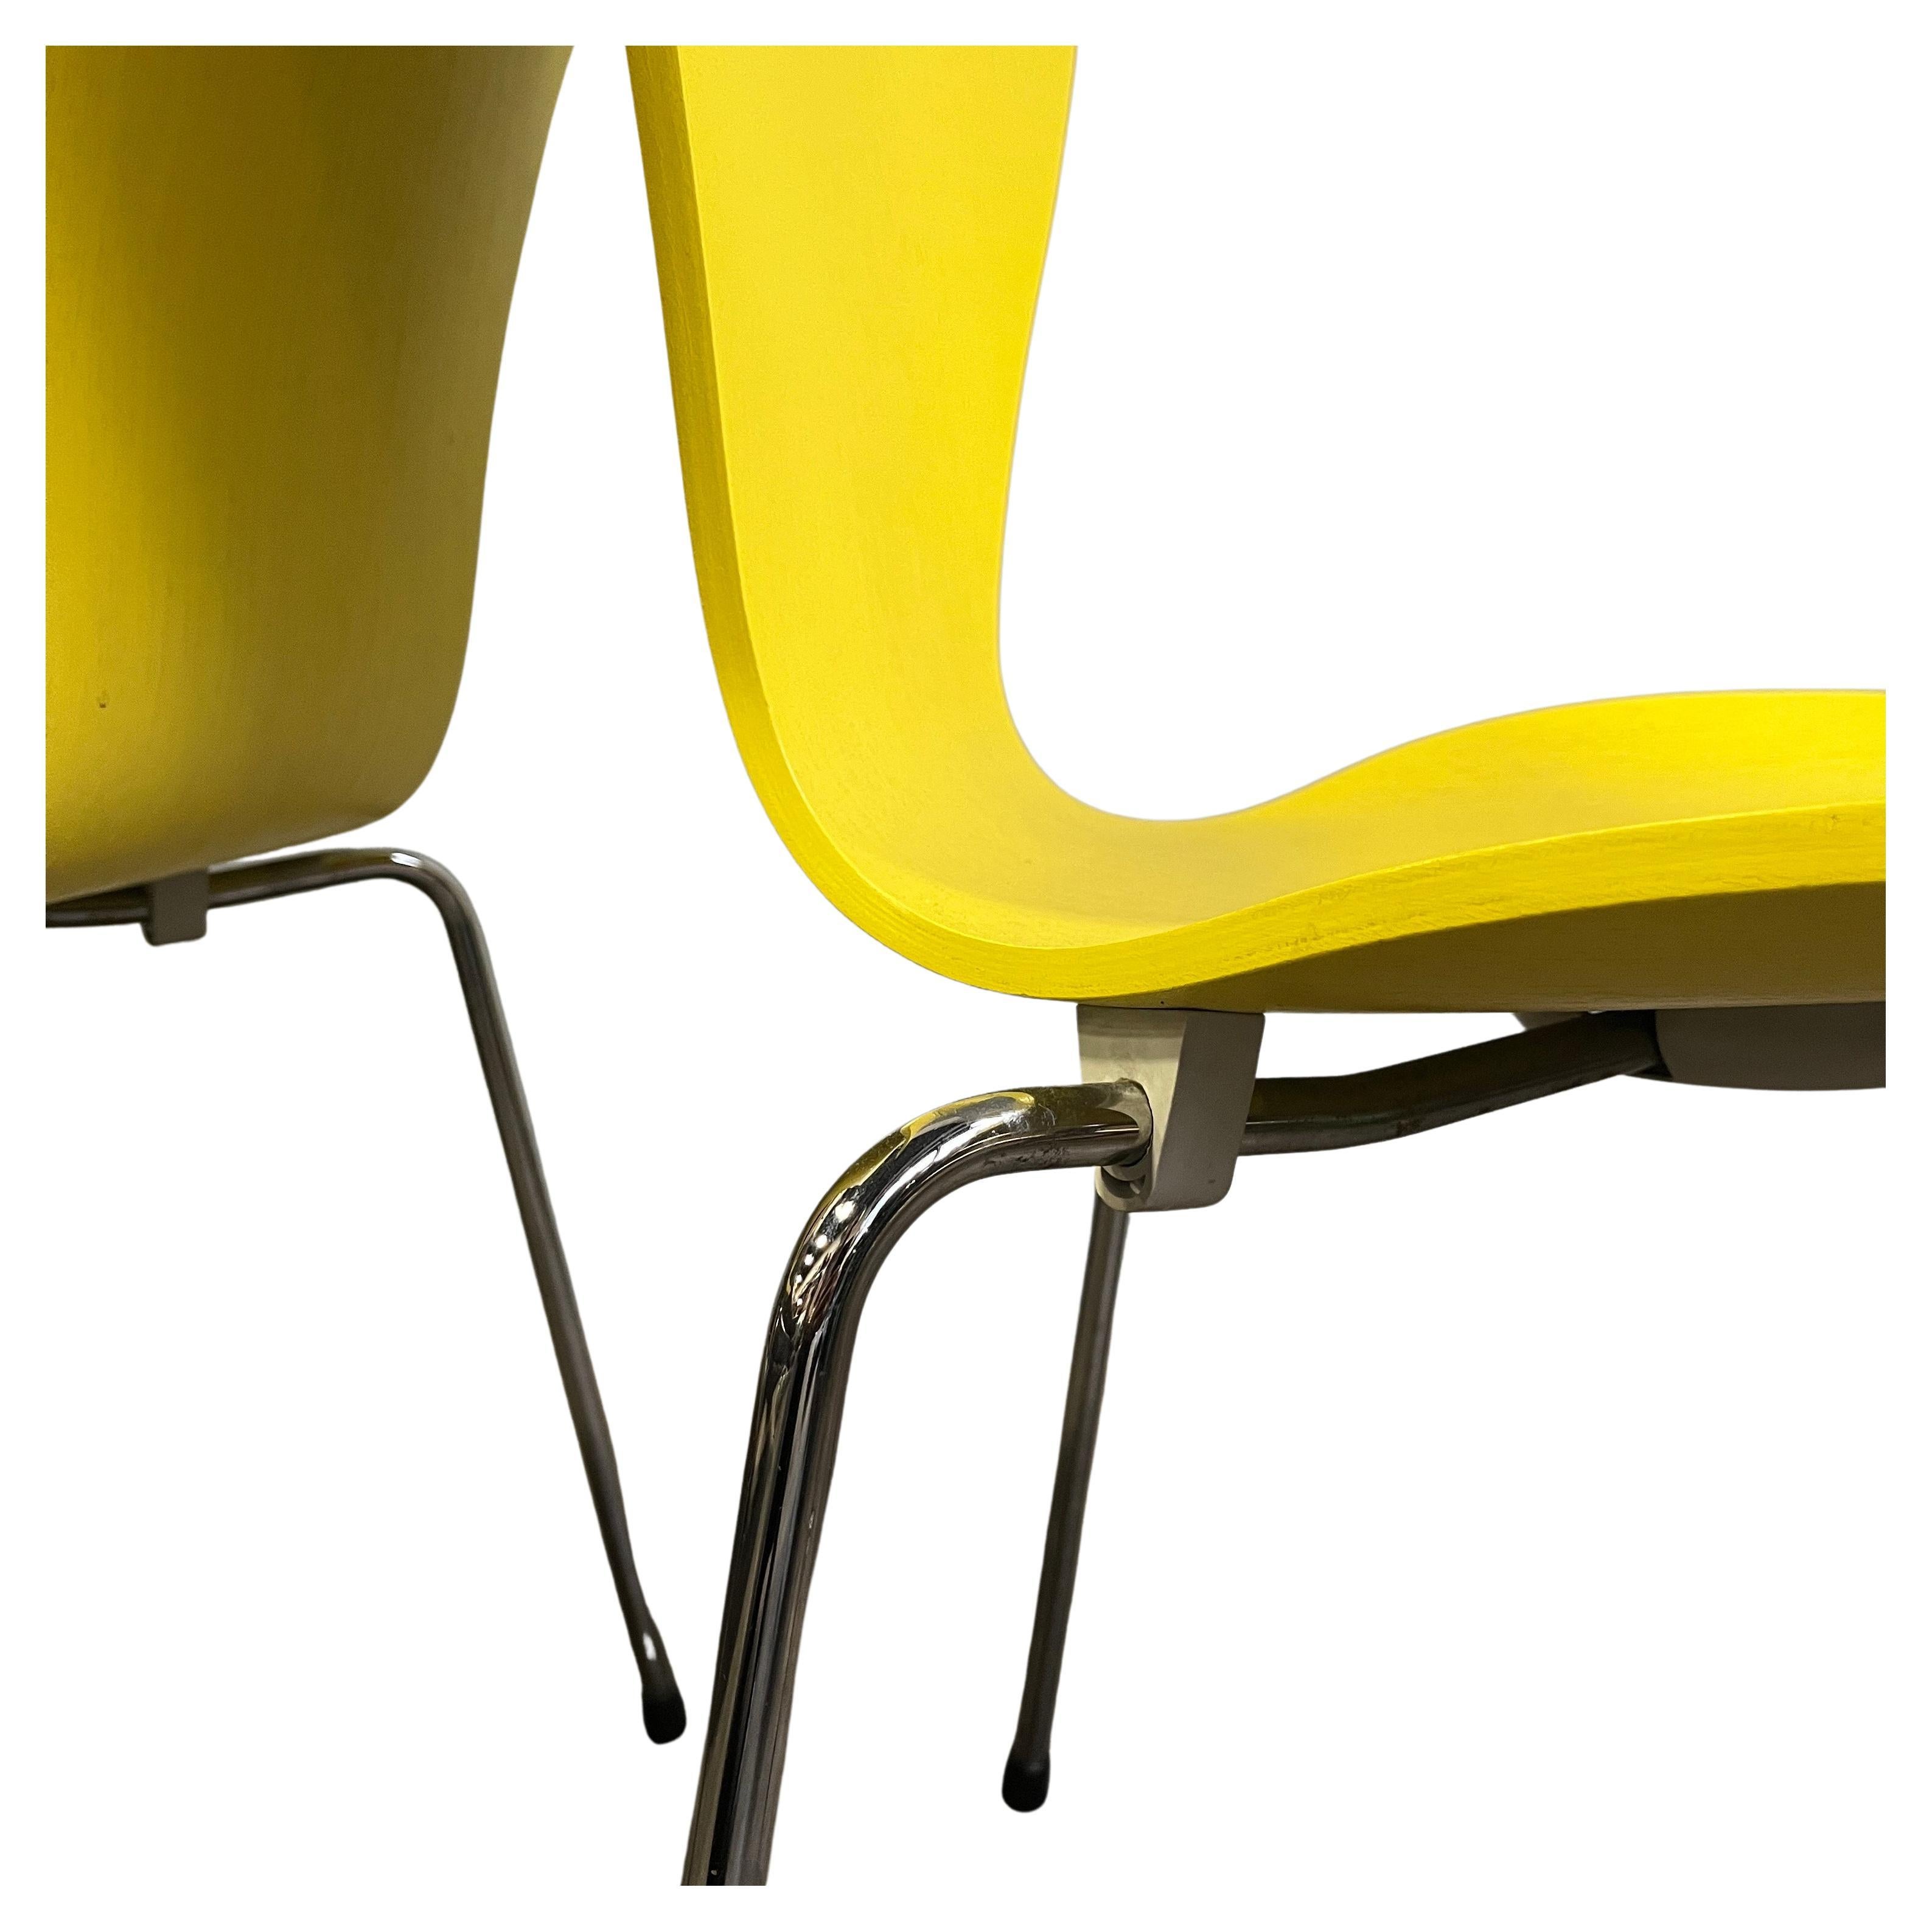 Midcentury Arne Jacobsen Series 7 Chairs Sunny Yellow In Good Condition For Sale In BROOKLYN, NY